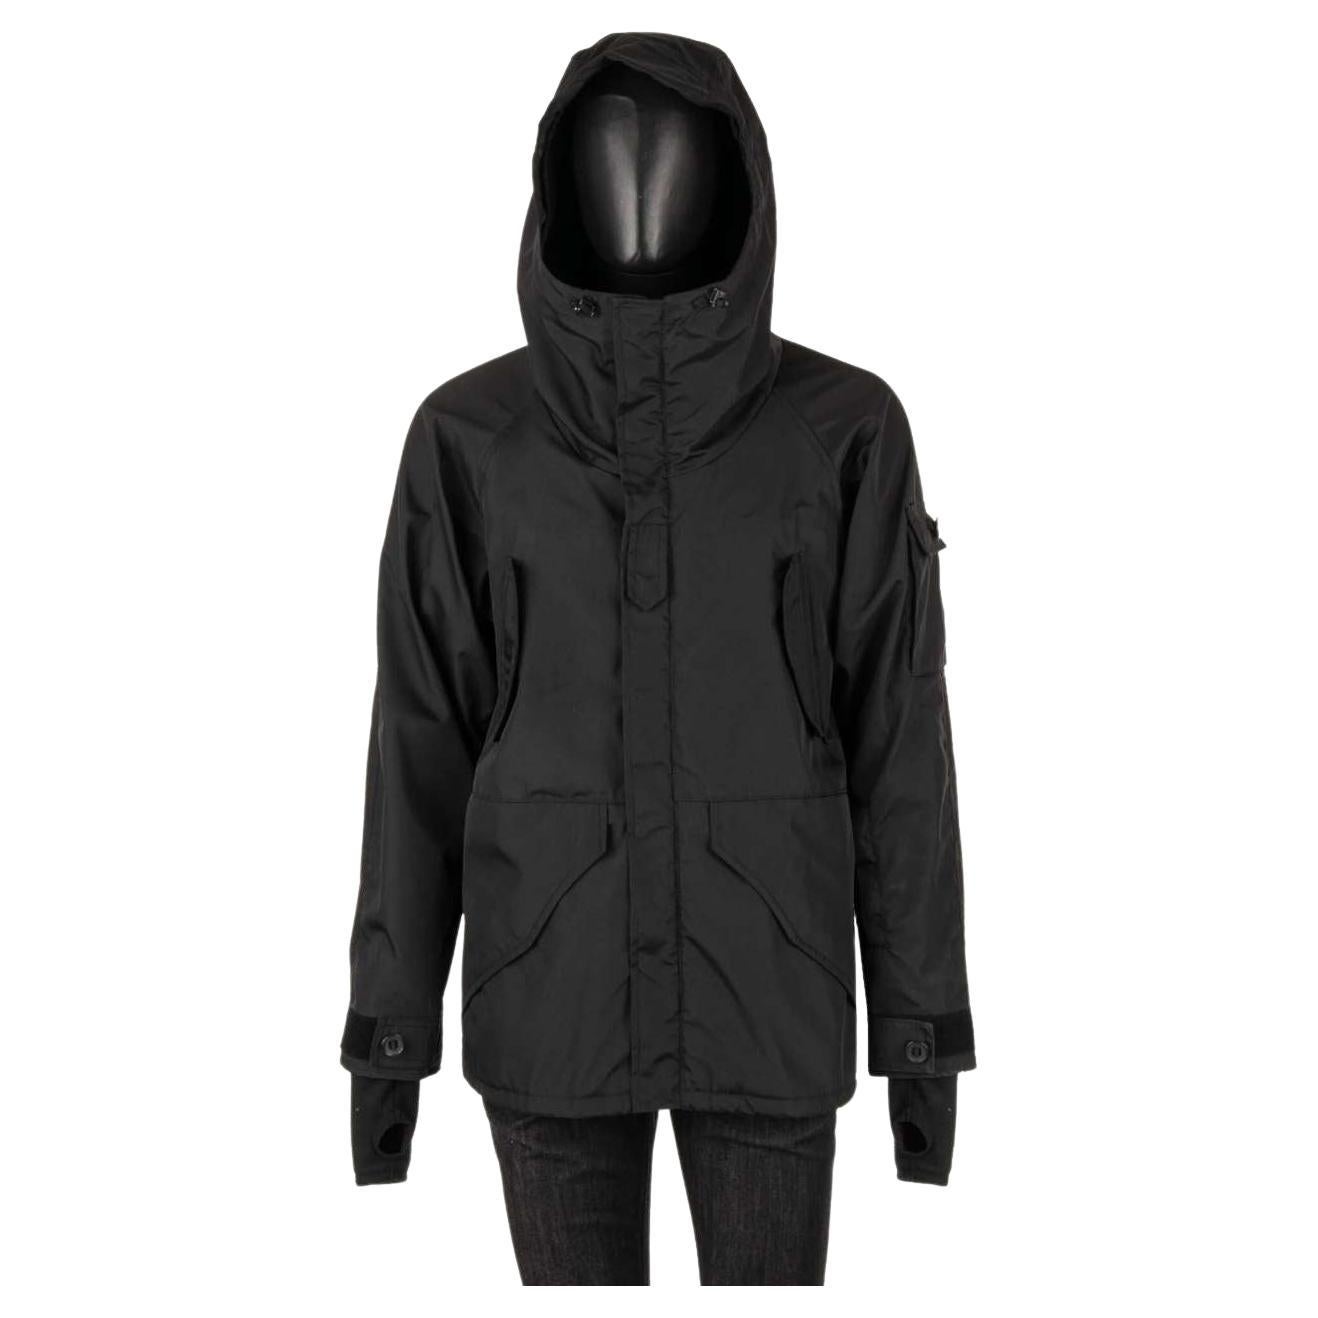 Dolce & Gabbana RECCO Ski Jacket with Pockets and Hand Warmer Black 48 M For Sale